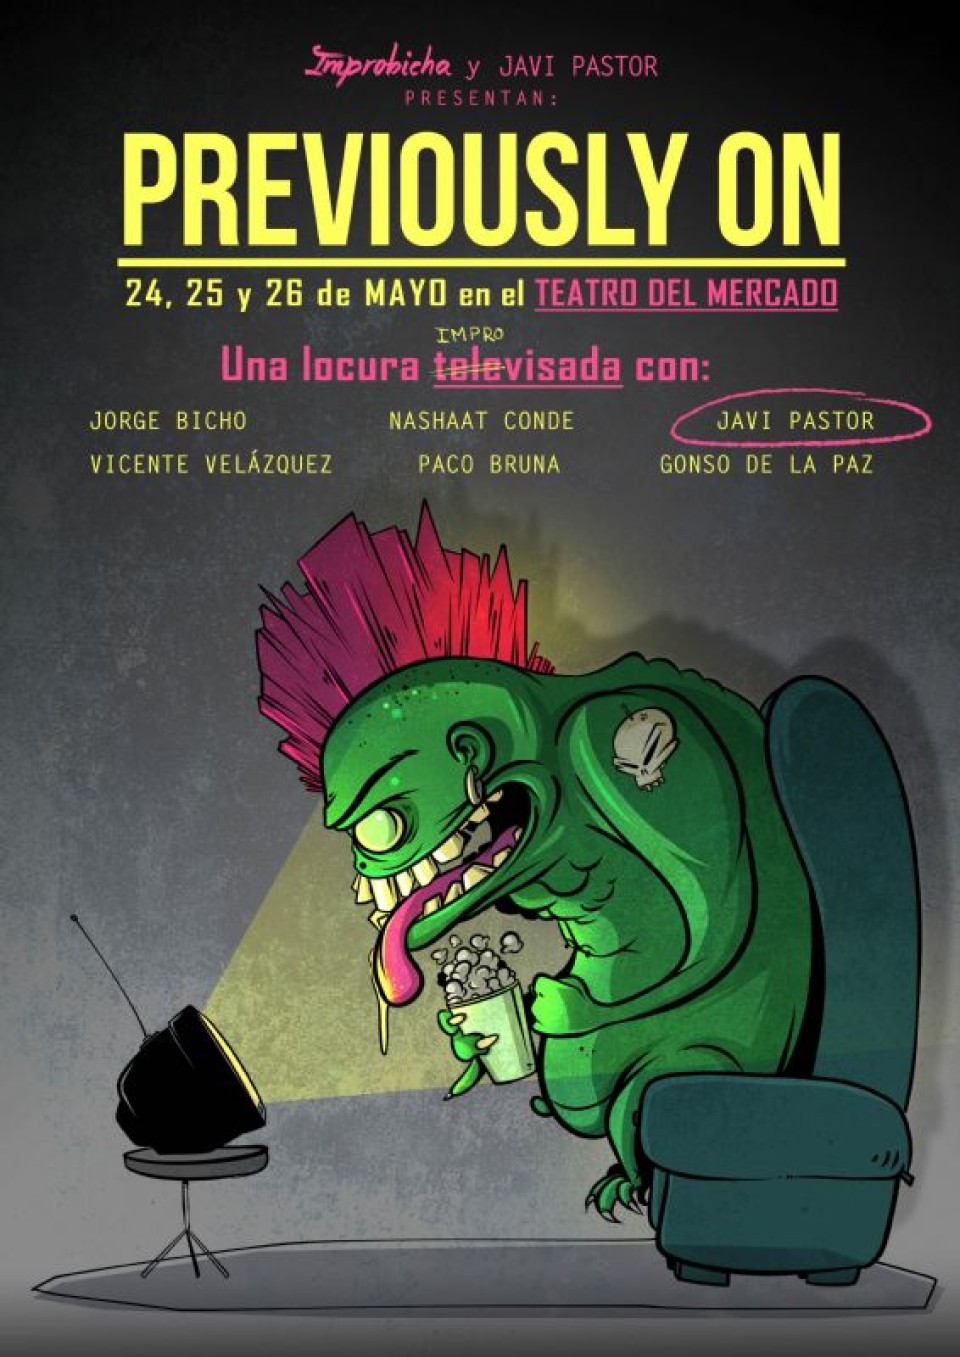 Imagen 'Previously on', cartel